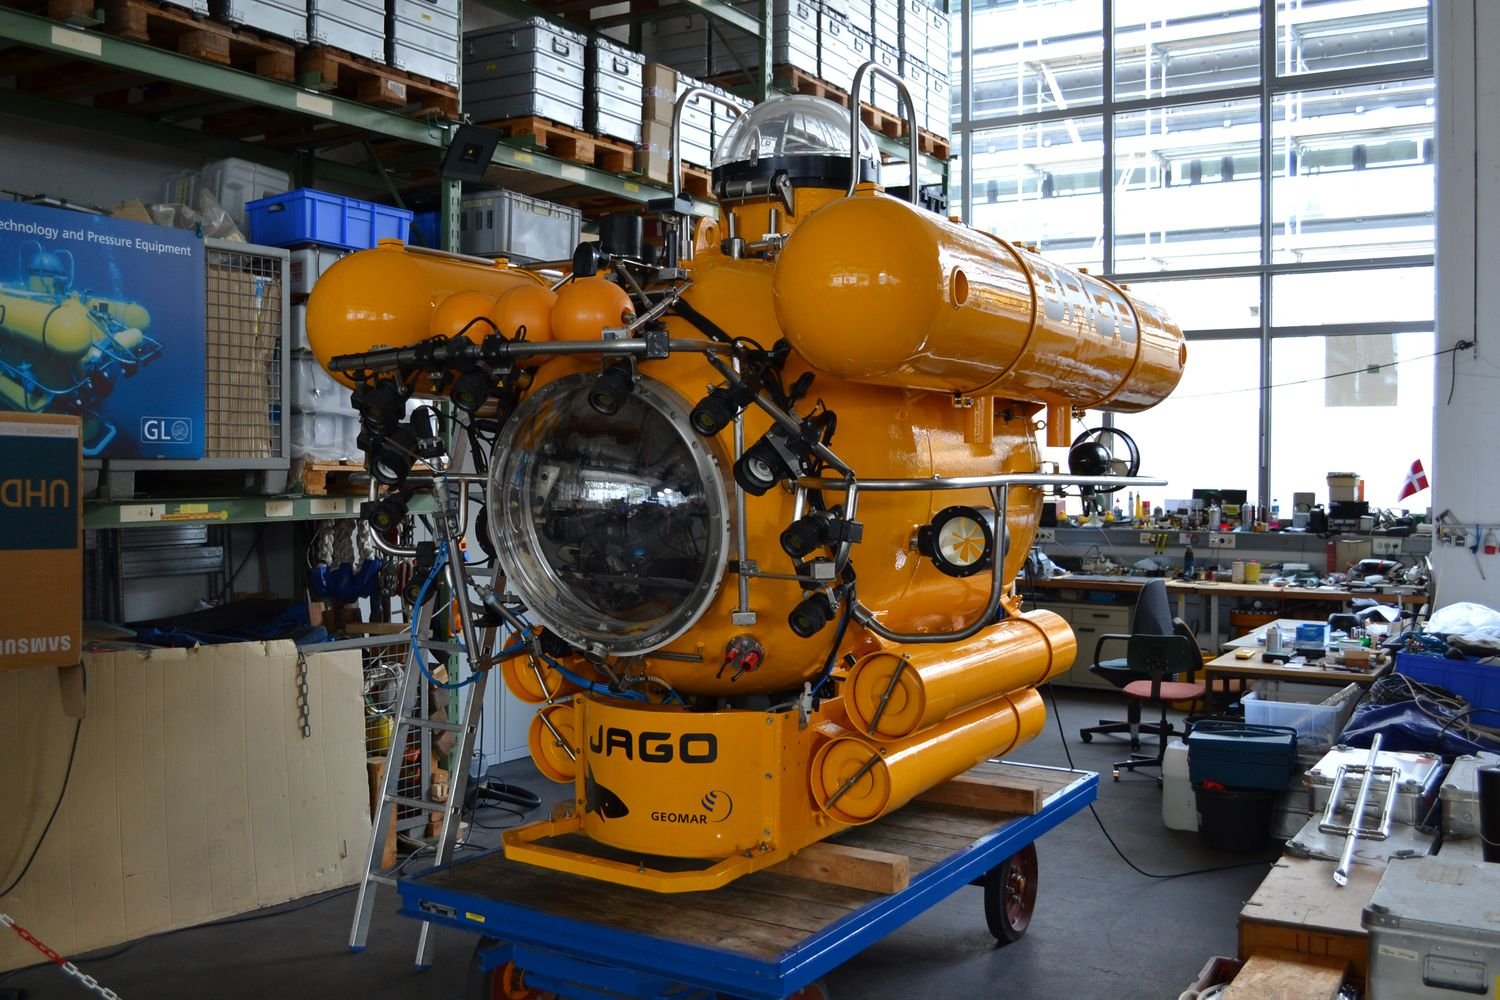 Submersible "Jago" can take two people to a depth of 400 metres